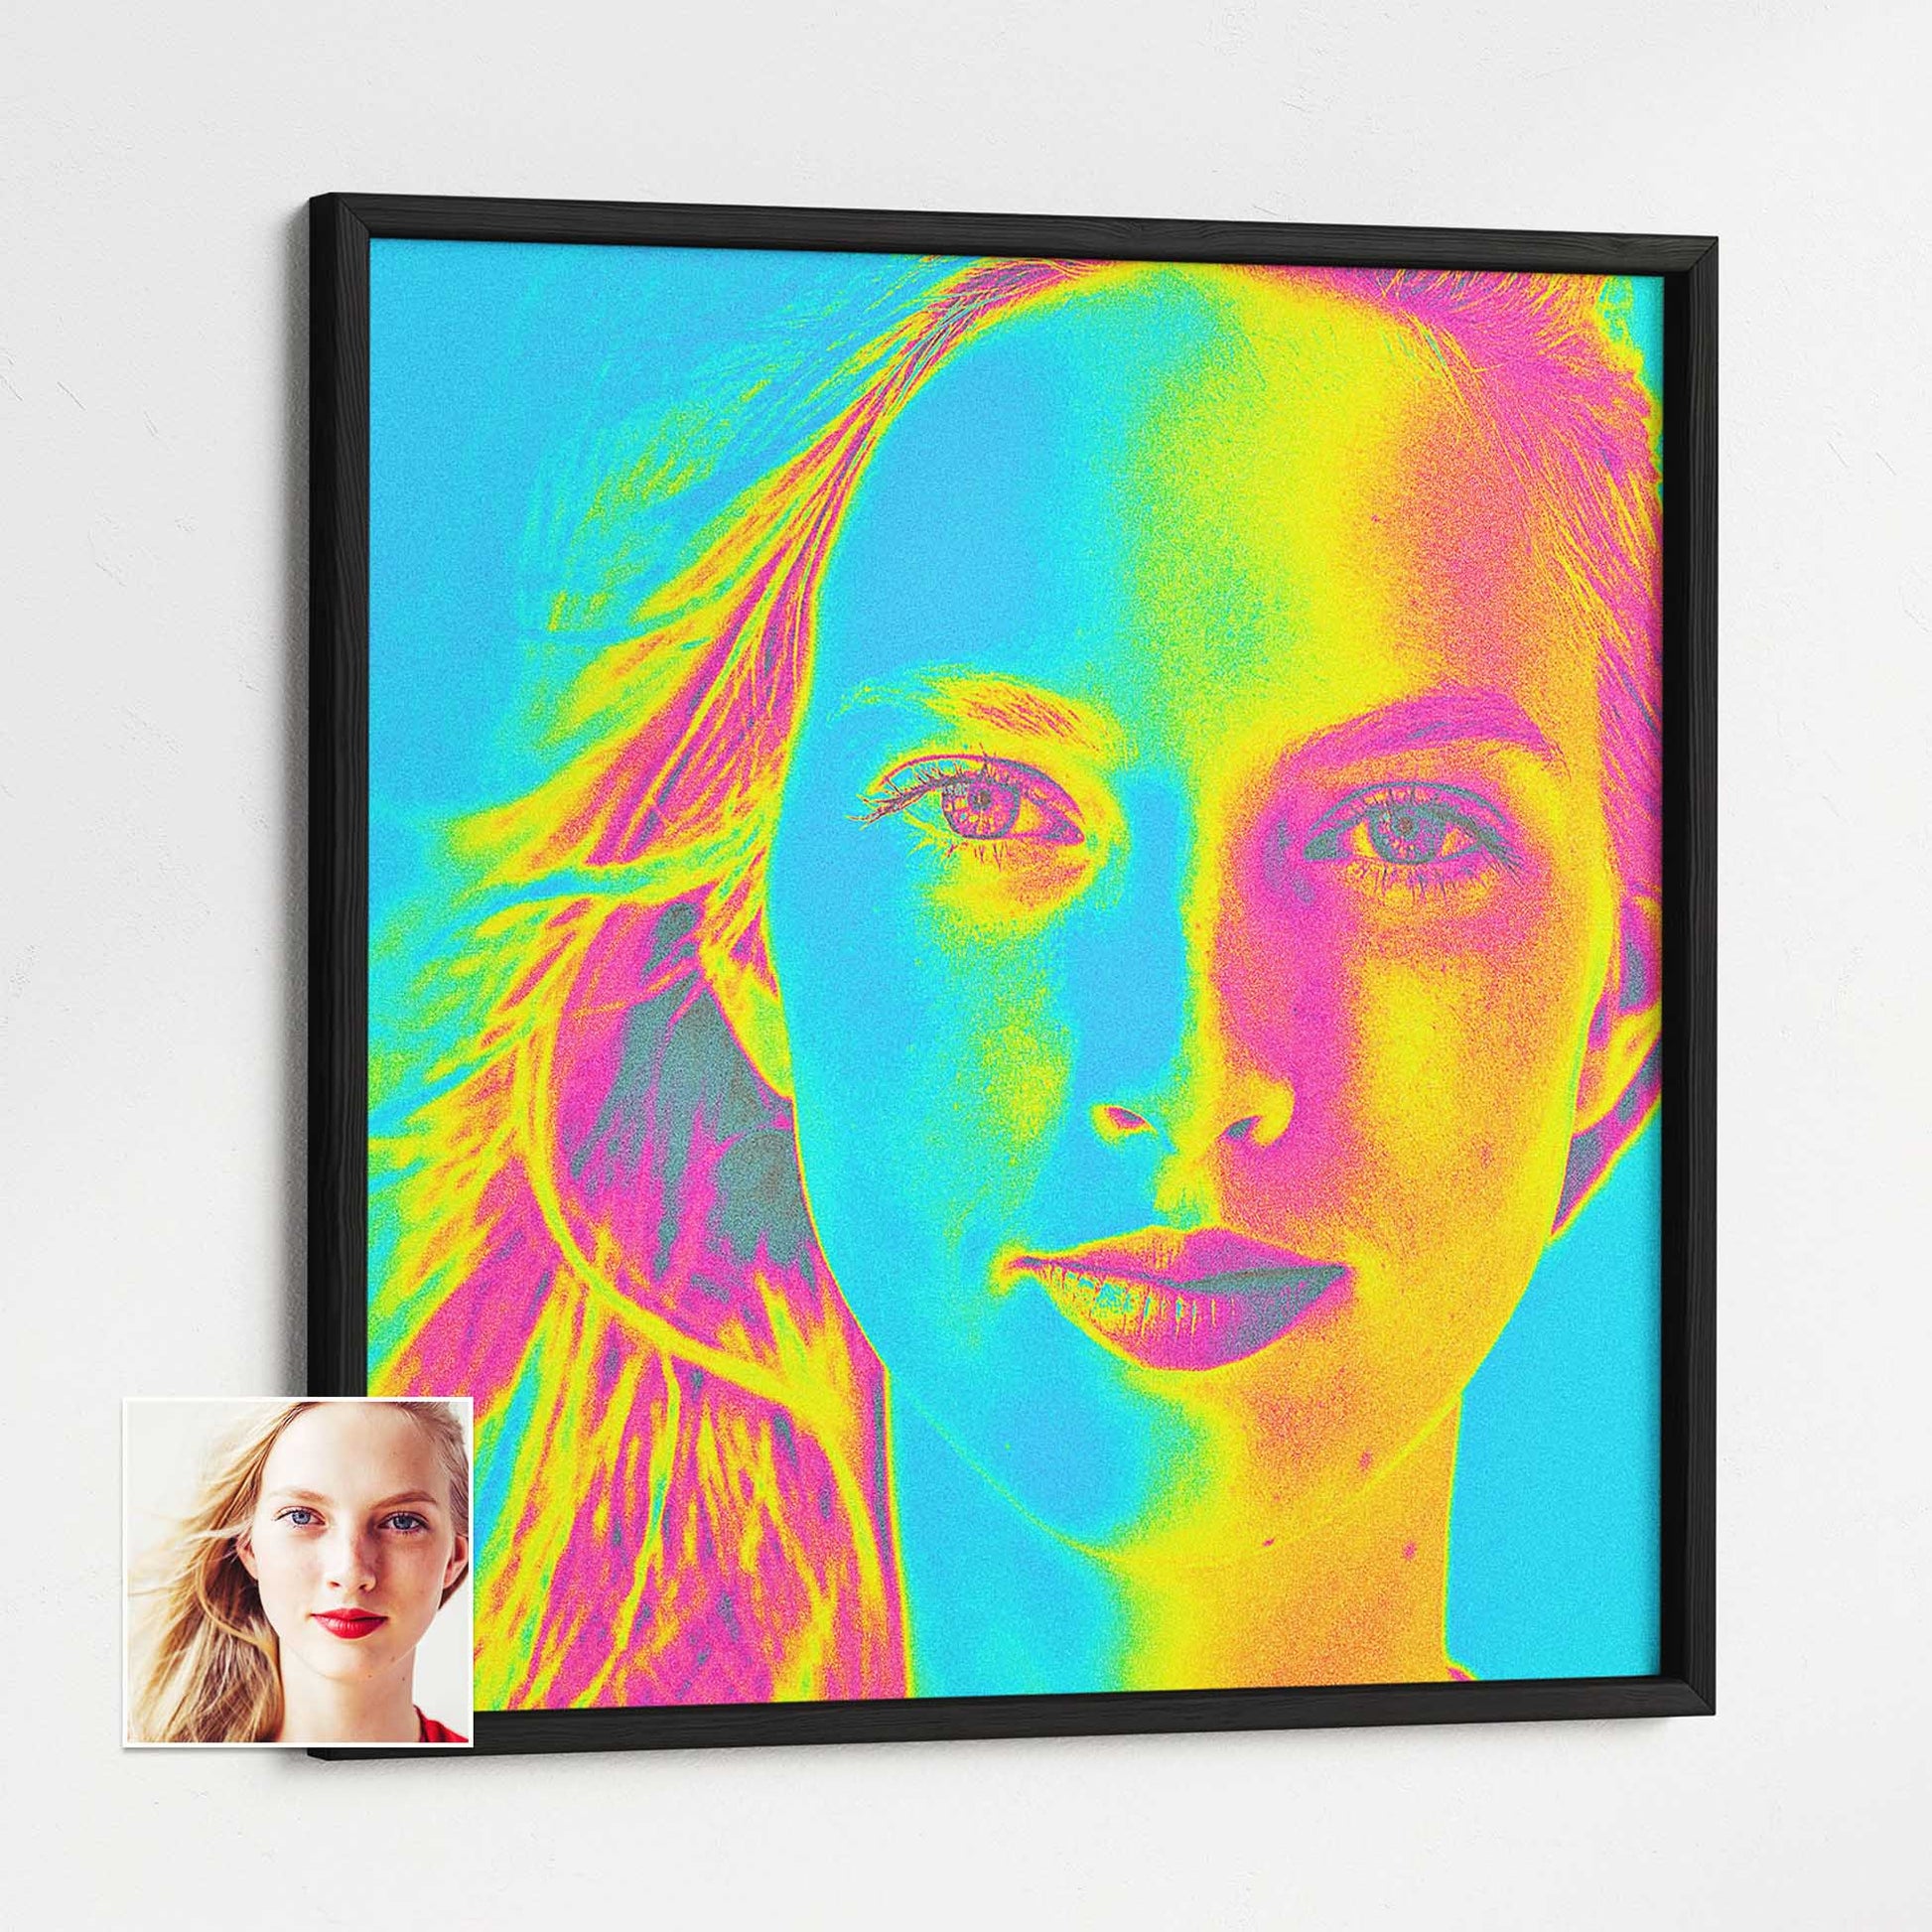 Add a pop of vibrant color to your home decor with Personalised Acid Trip Framed Print. This fine digital art piece creates a bold statement with its colorful and vivid design. Crafted from your photo, it captures a sharp and vibrant print